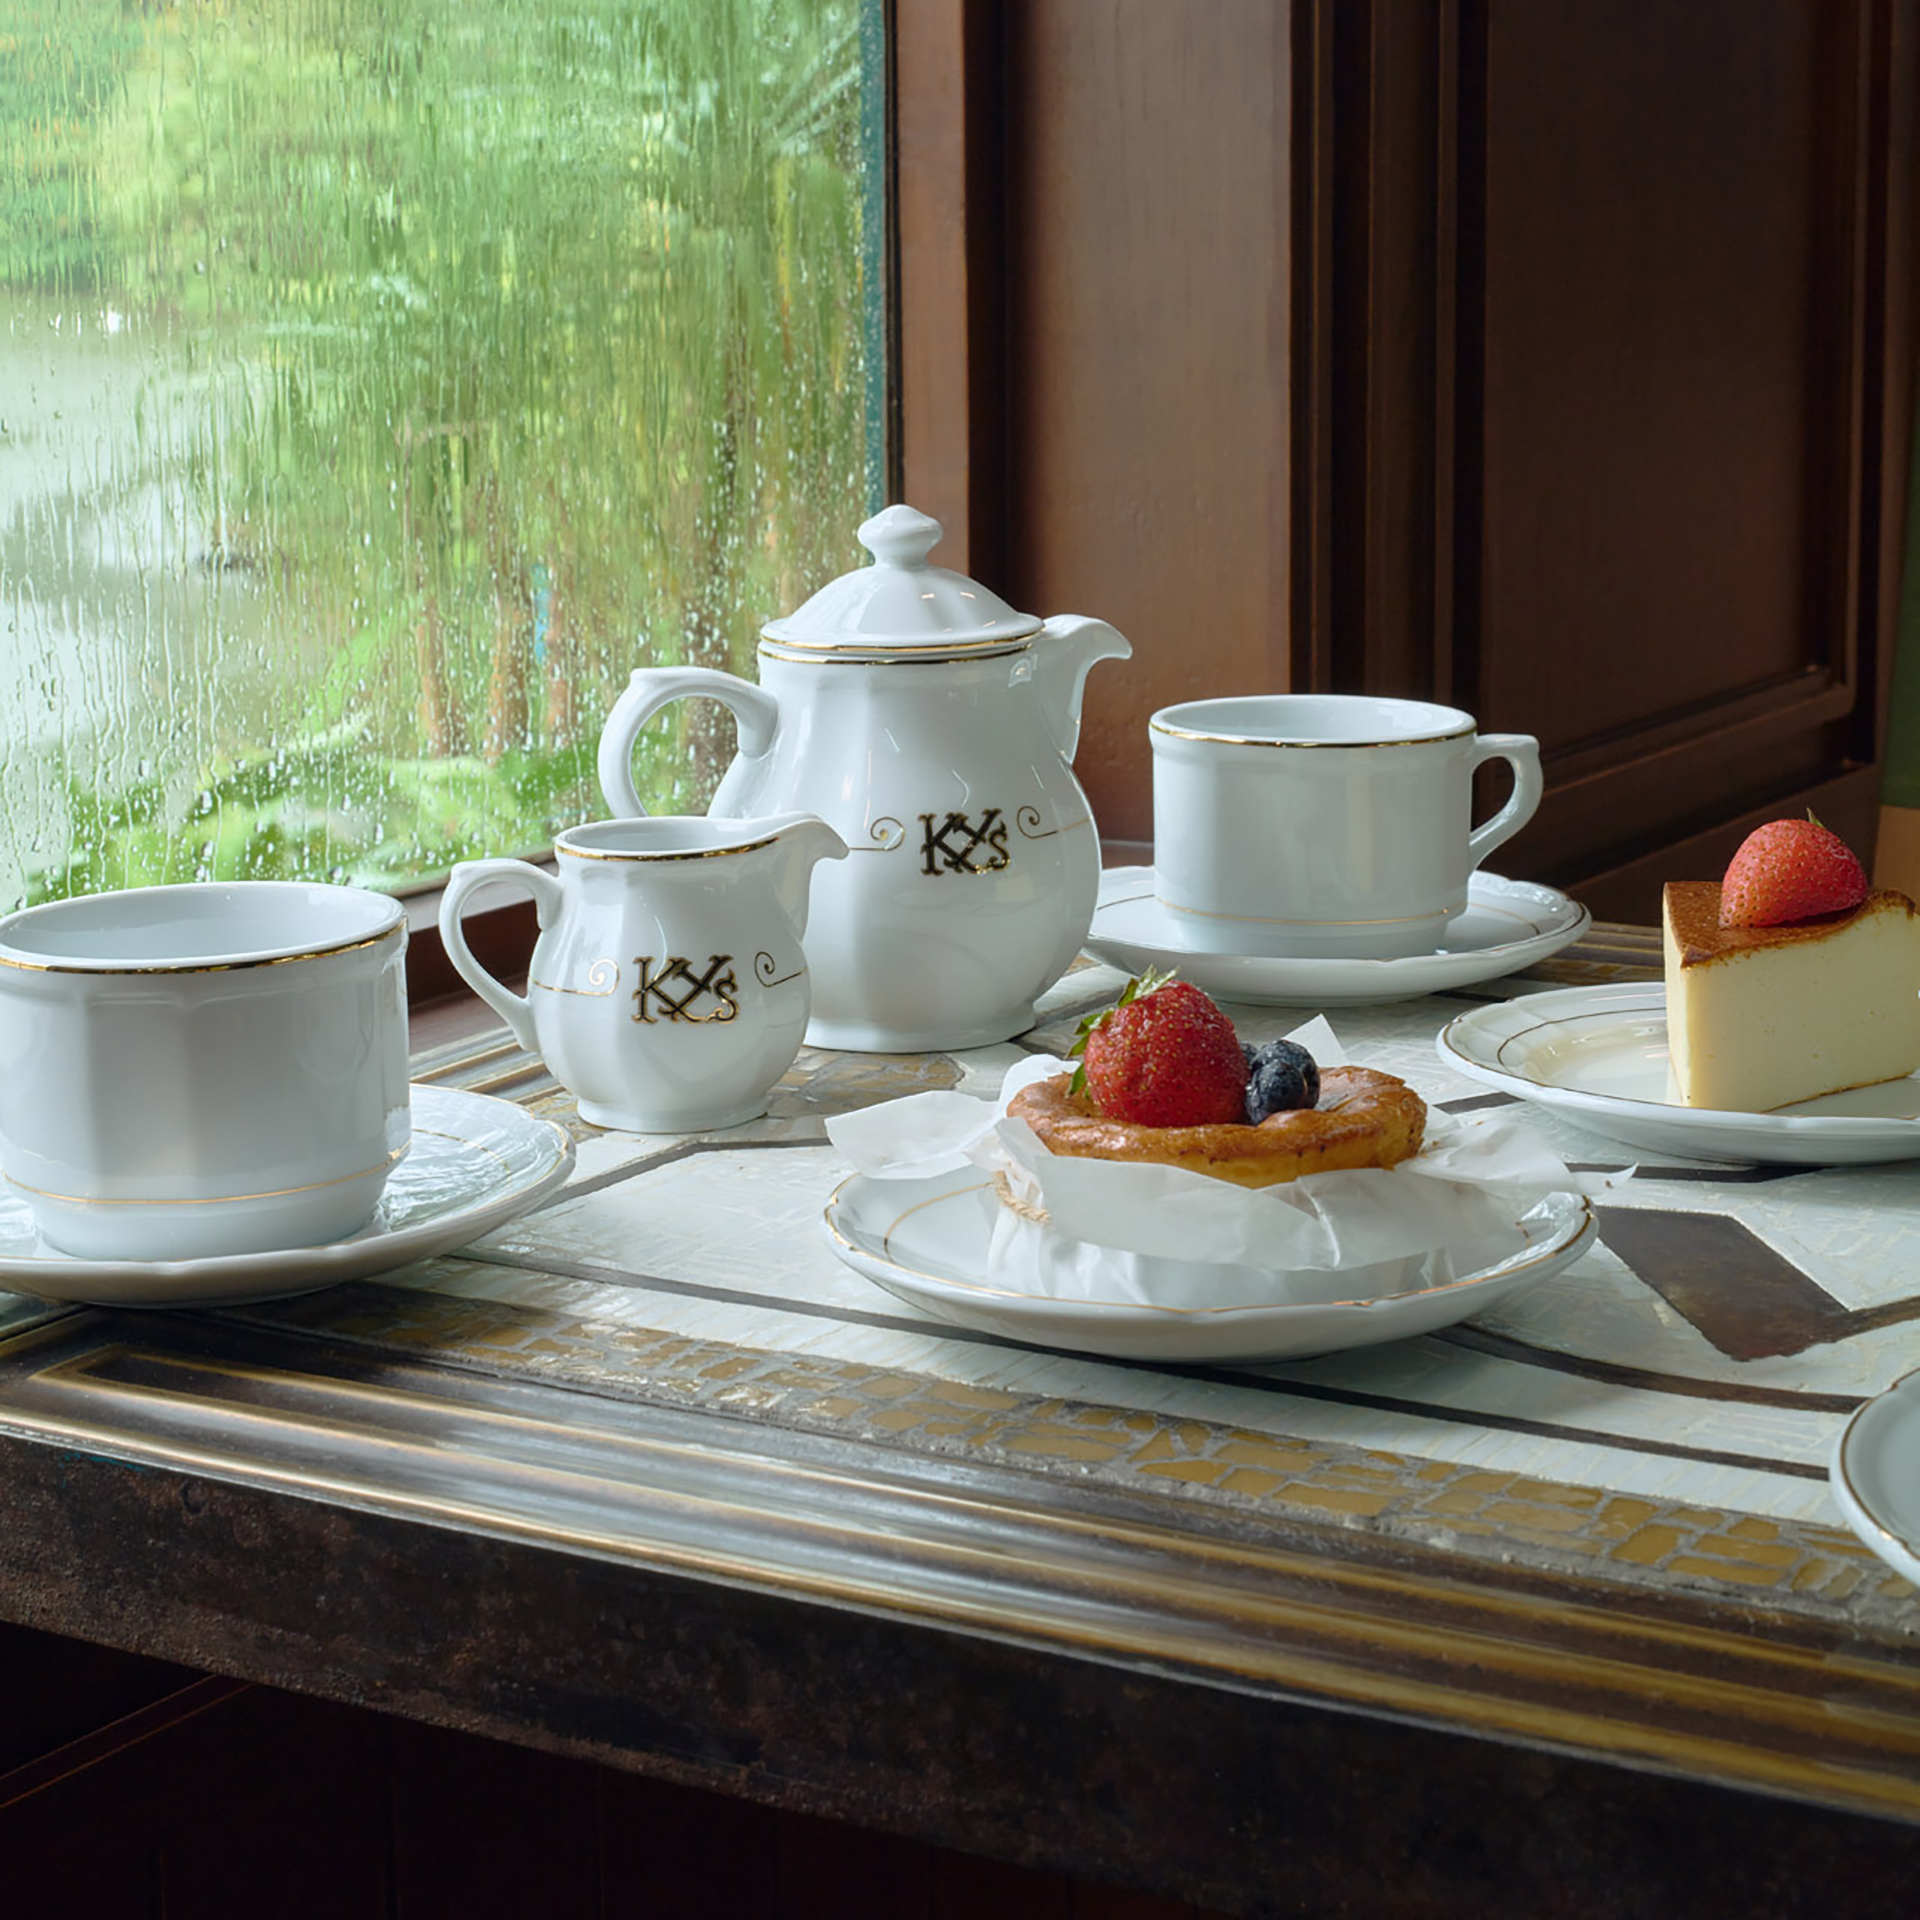 tabletop white porcelain tea set with pastry